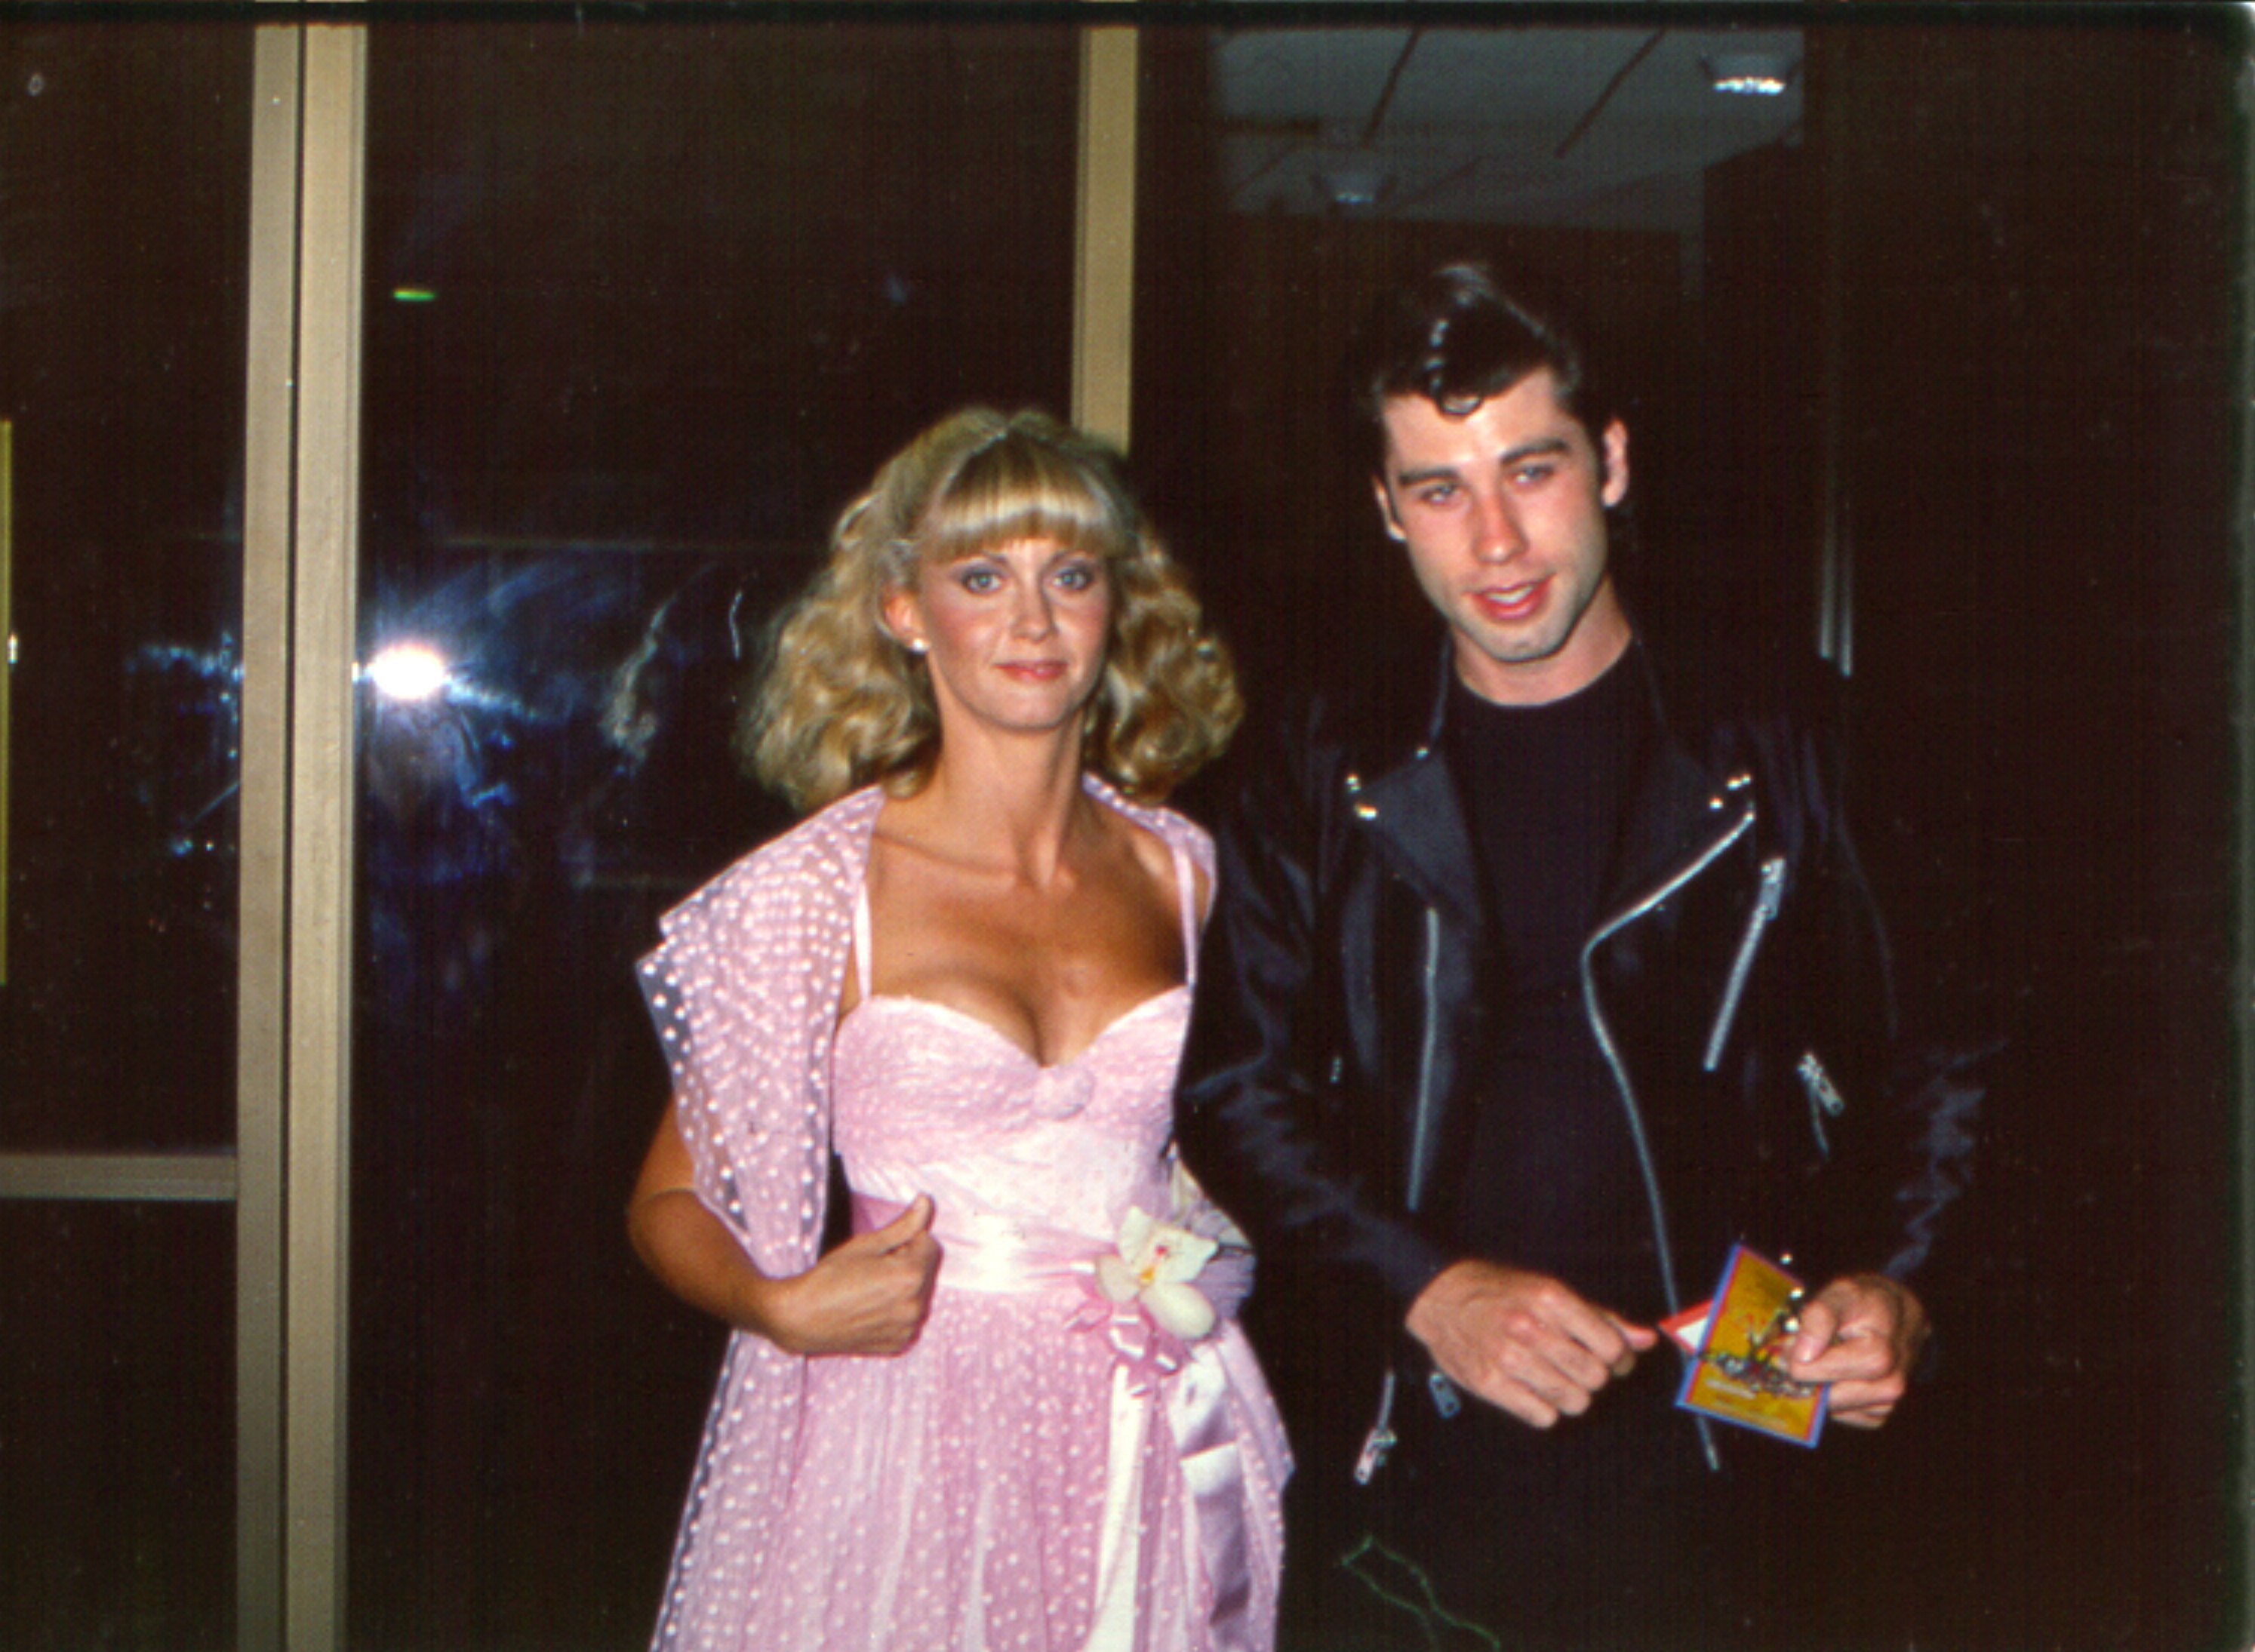 Olivia Newton-John and John Travolta attending the premiere of the musical film "Grease," in 1978. / Source: Getty Images